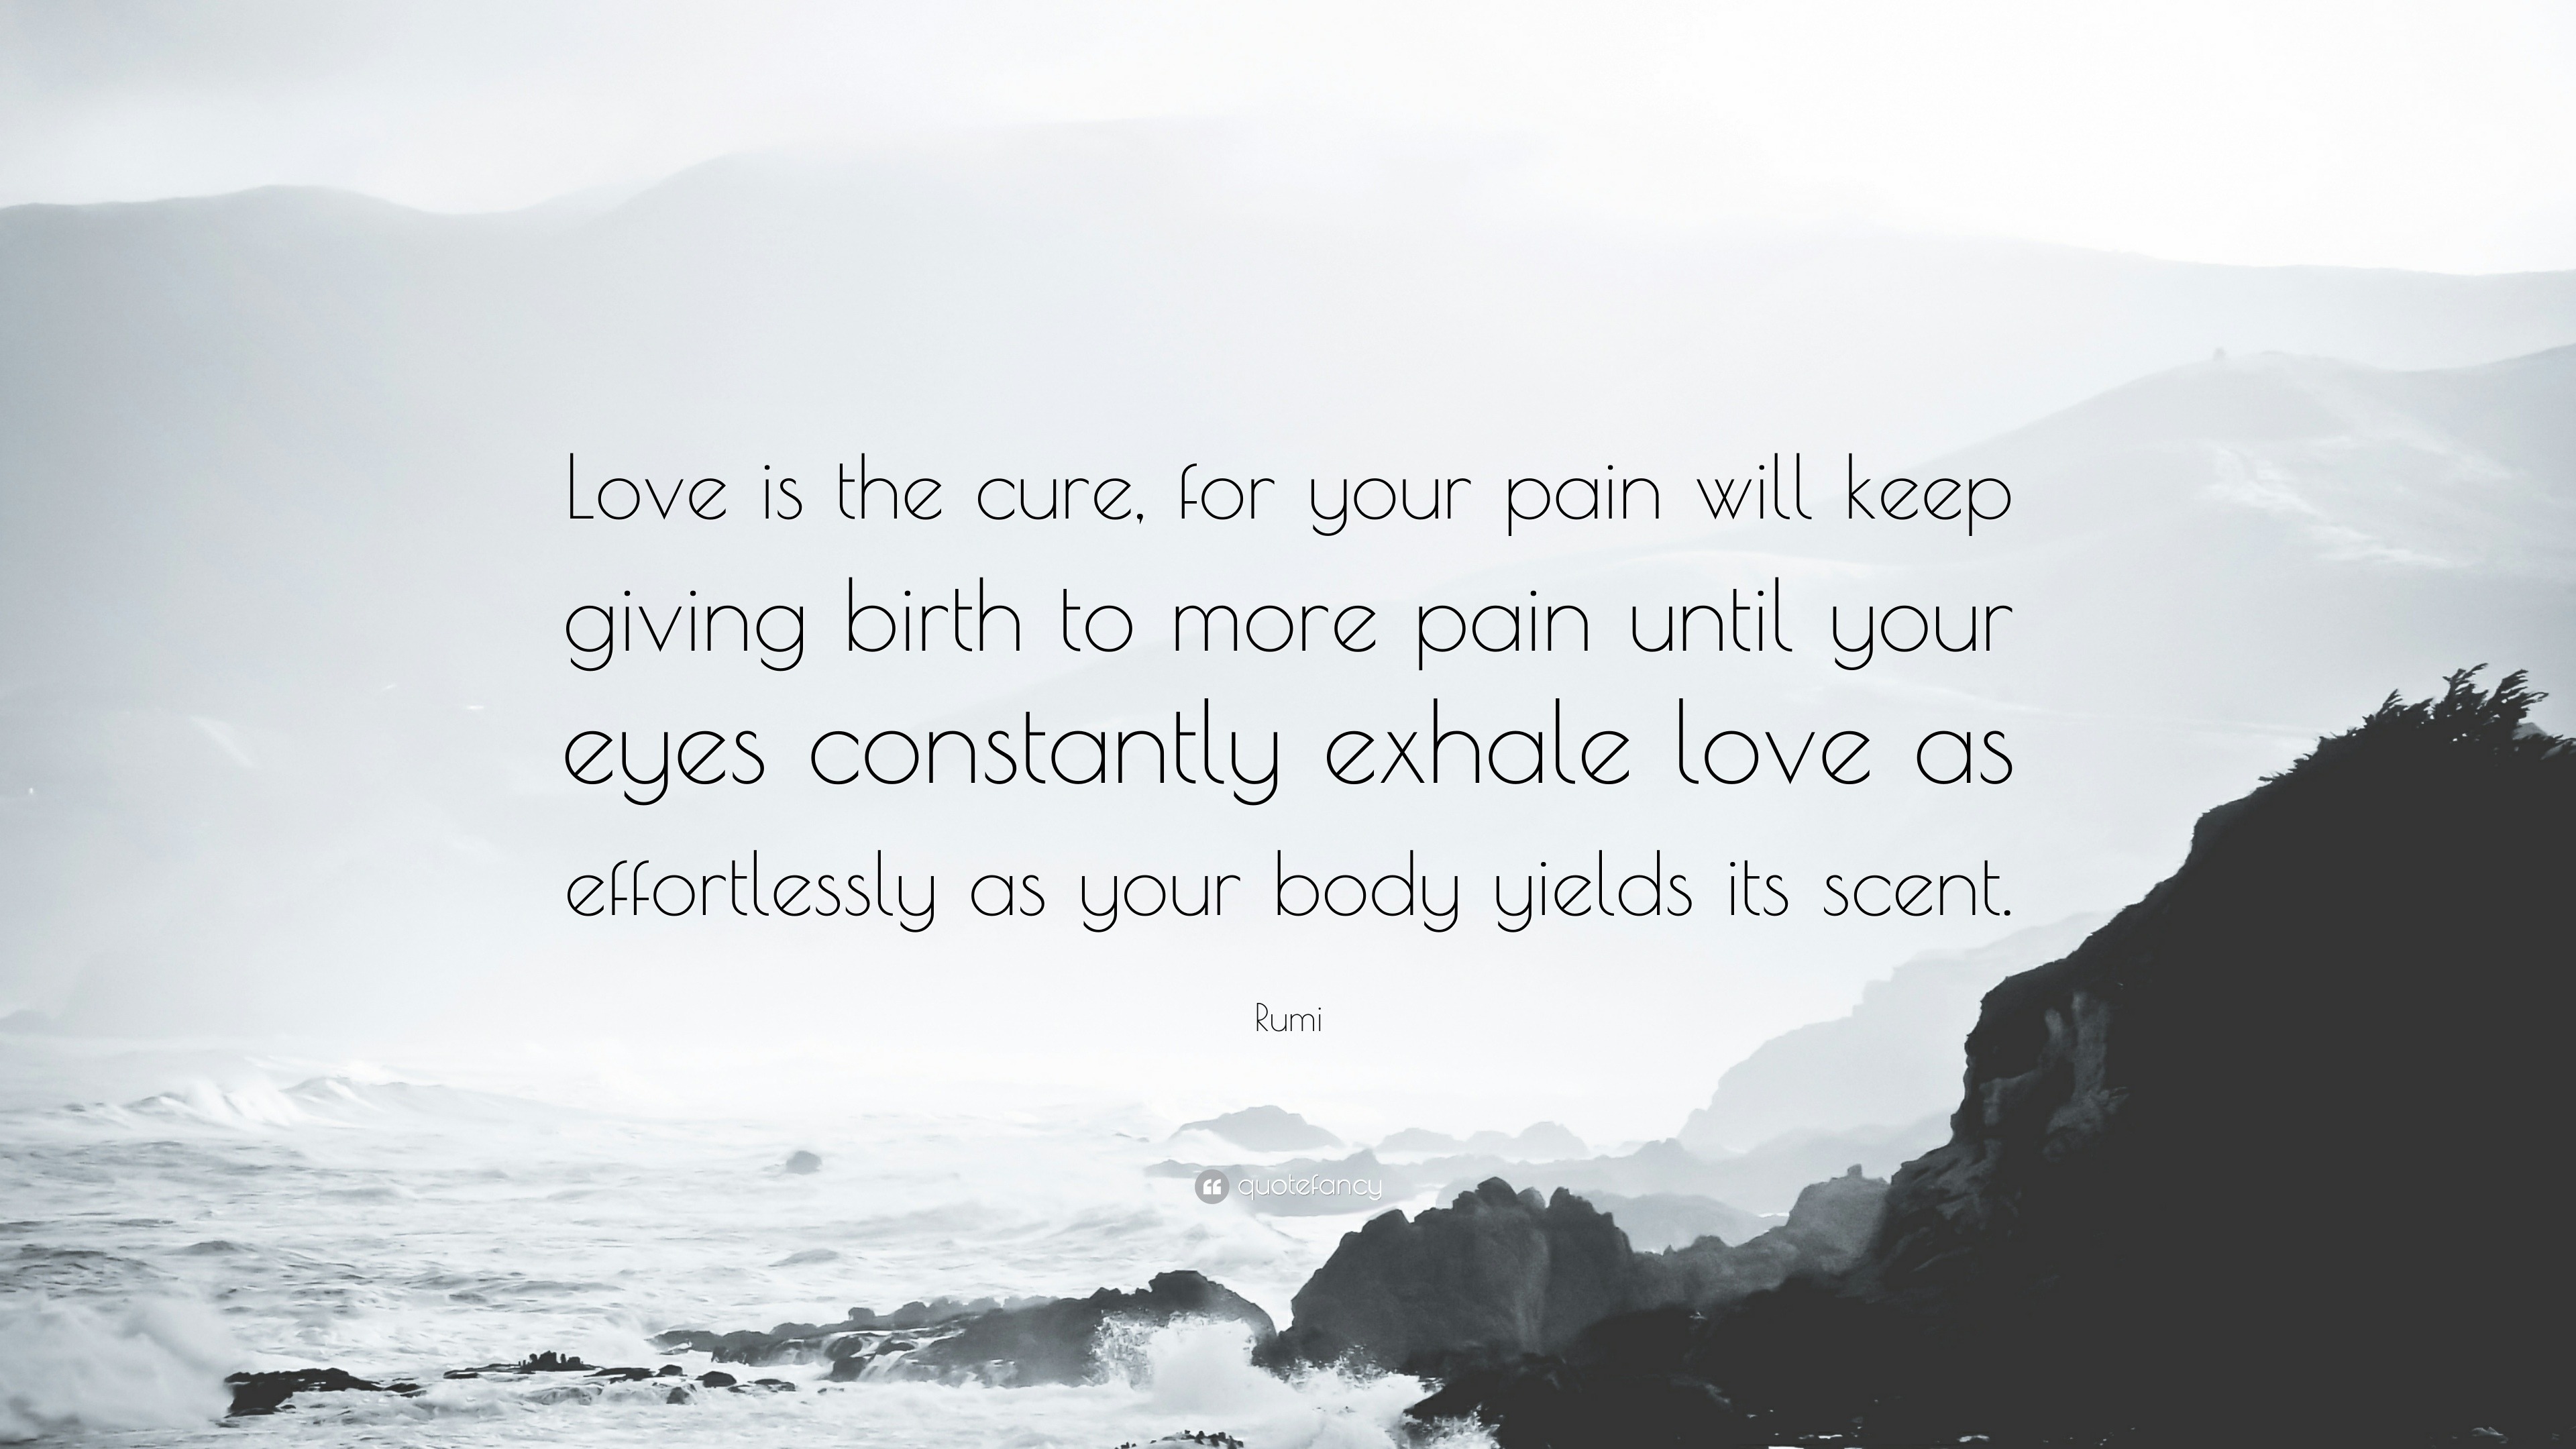 Rumi Quote “Love is the cure, for your pain will keep